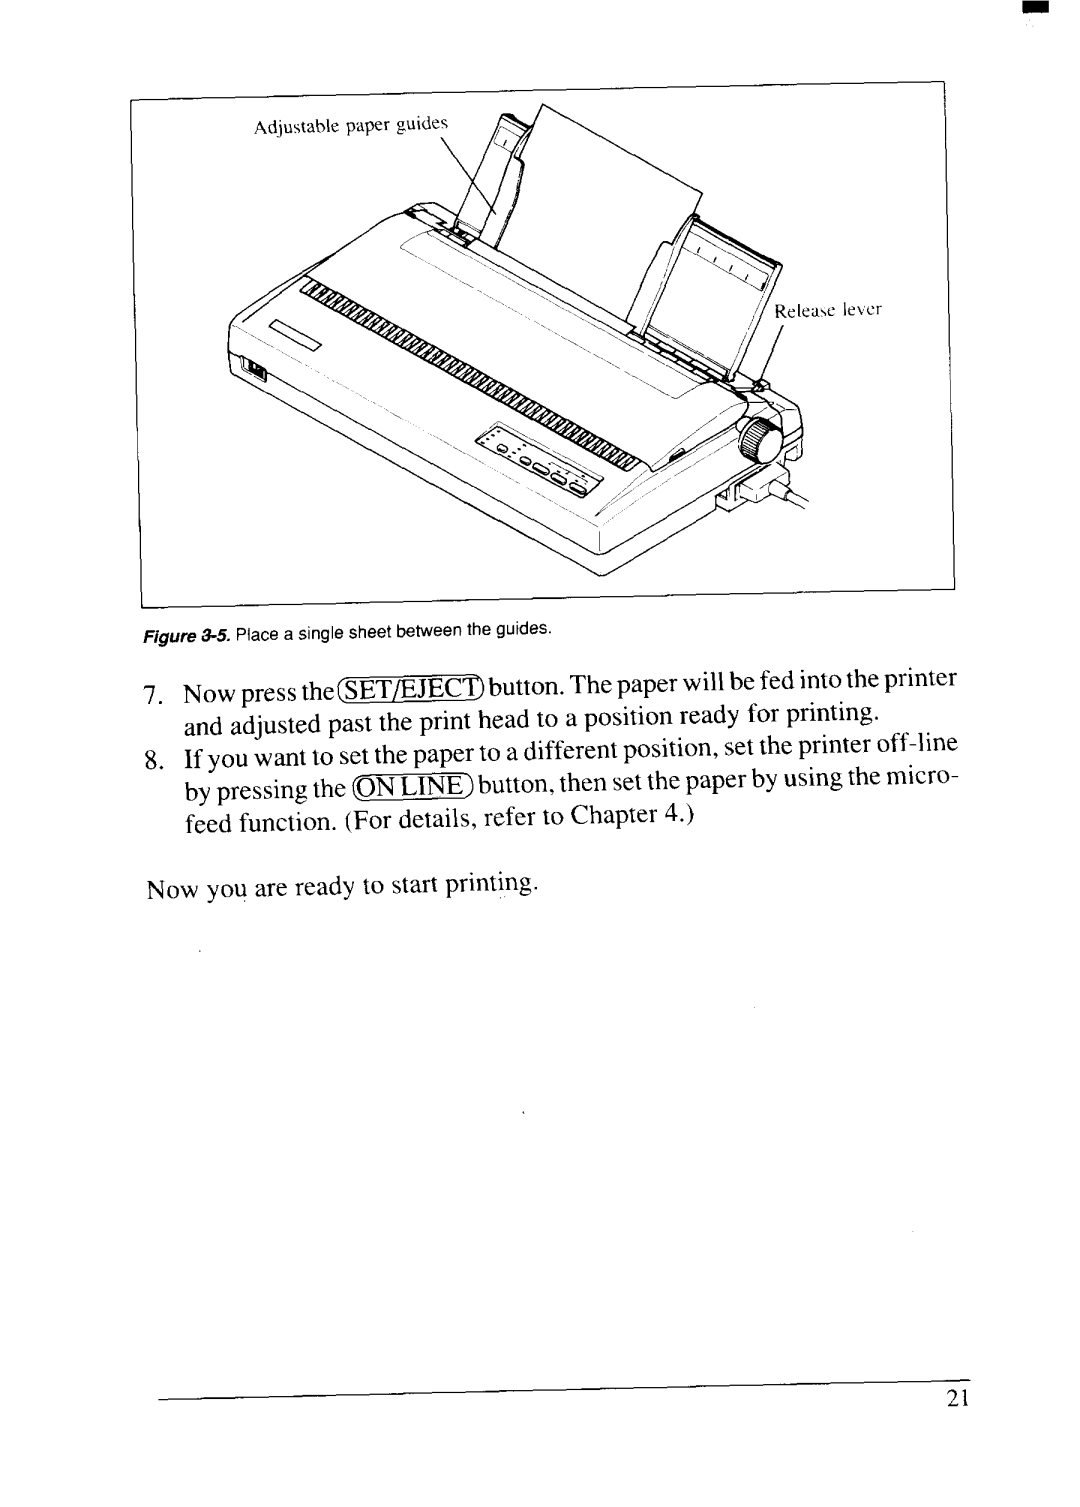 Star Micronics NX-2415II user manual Now you are ready to start printing 